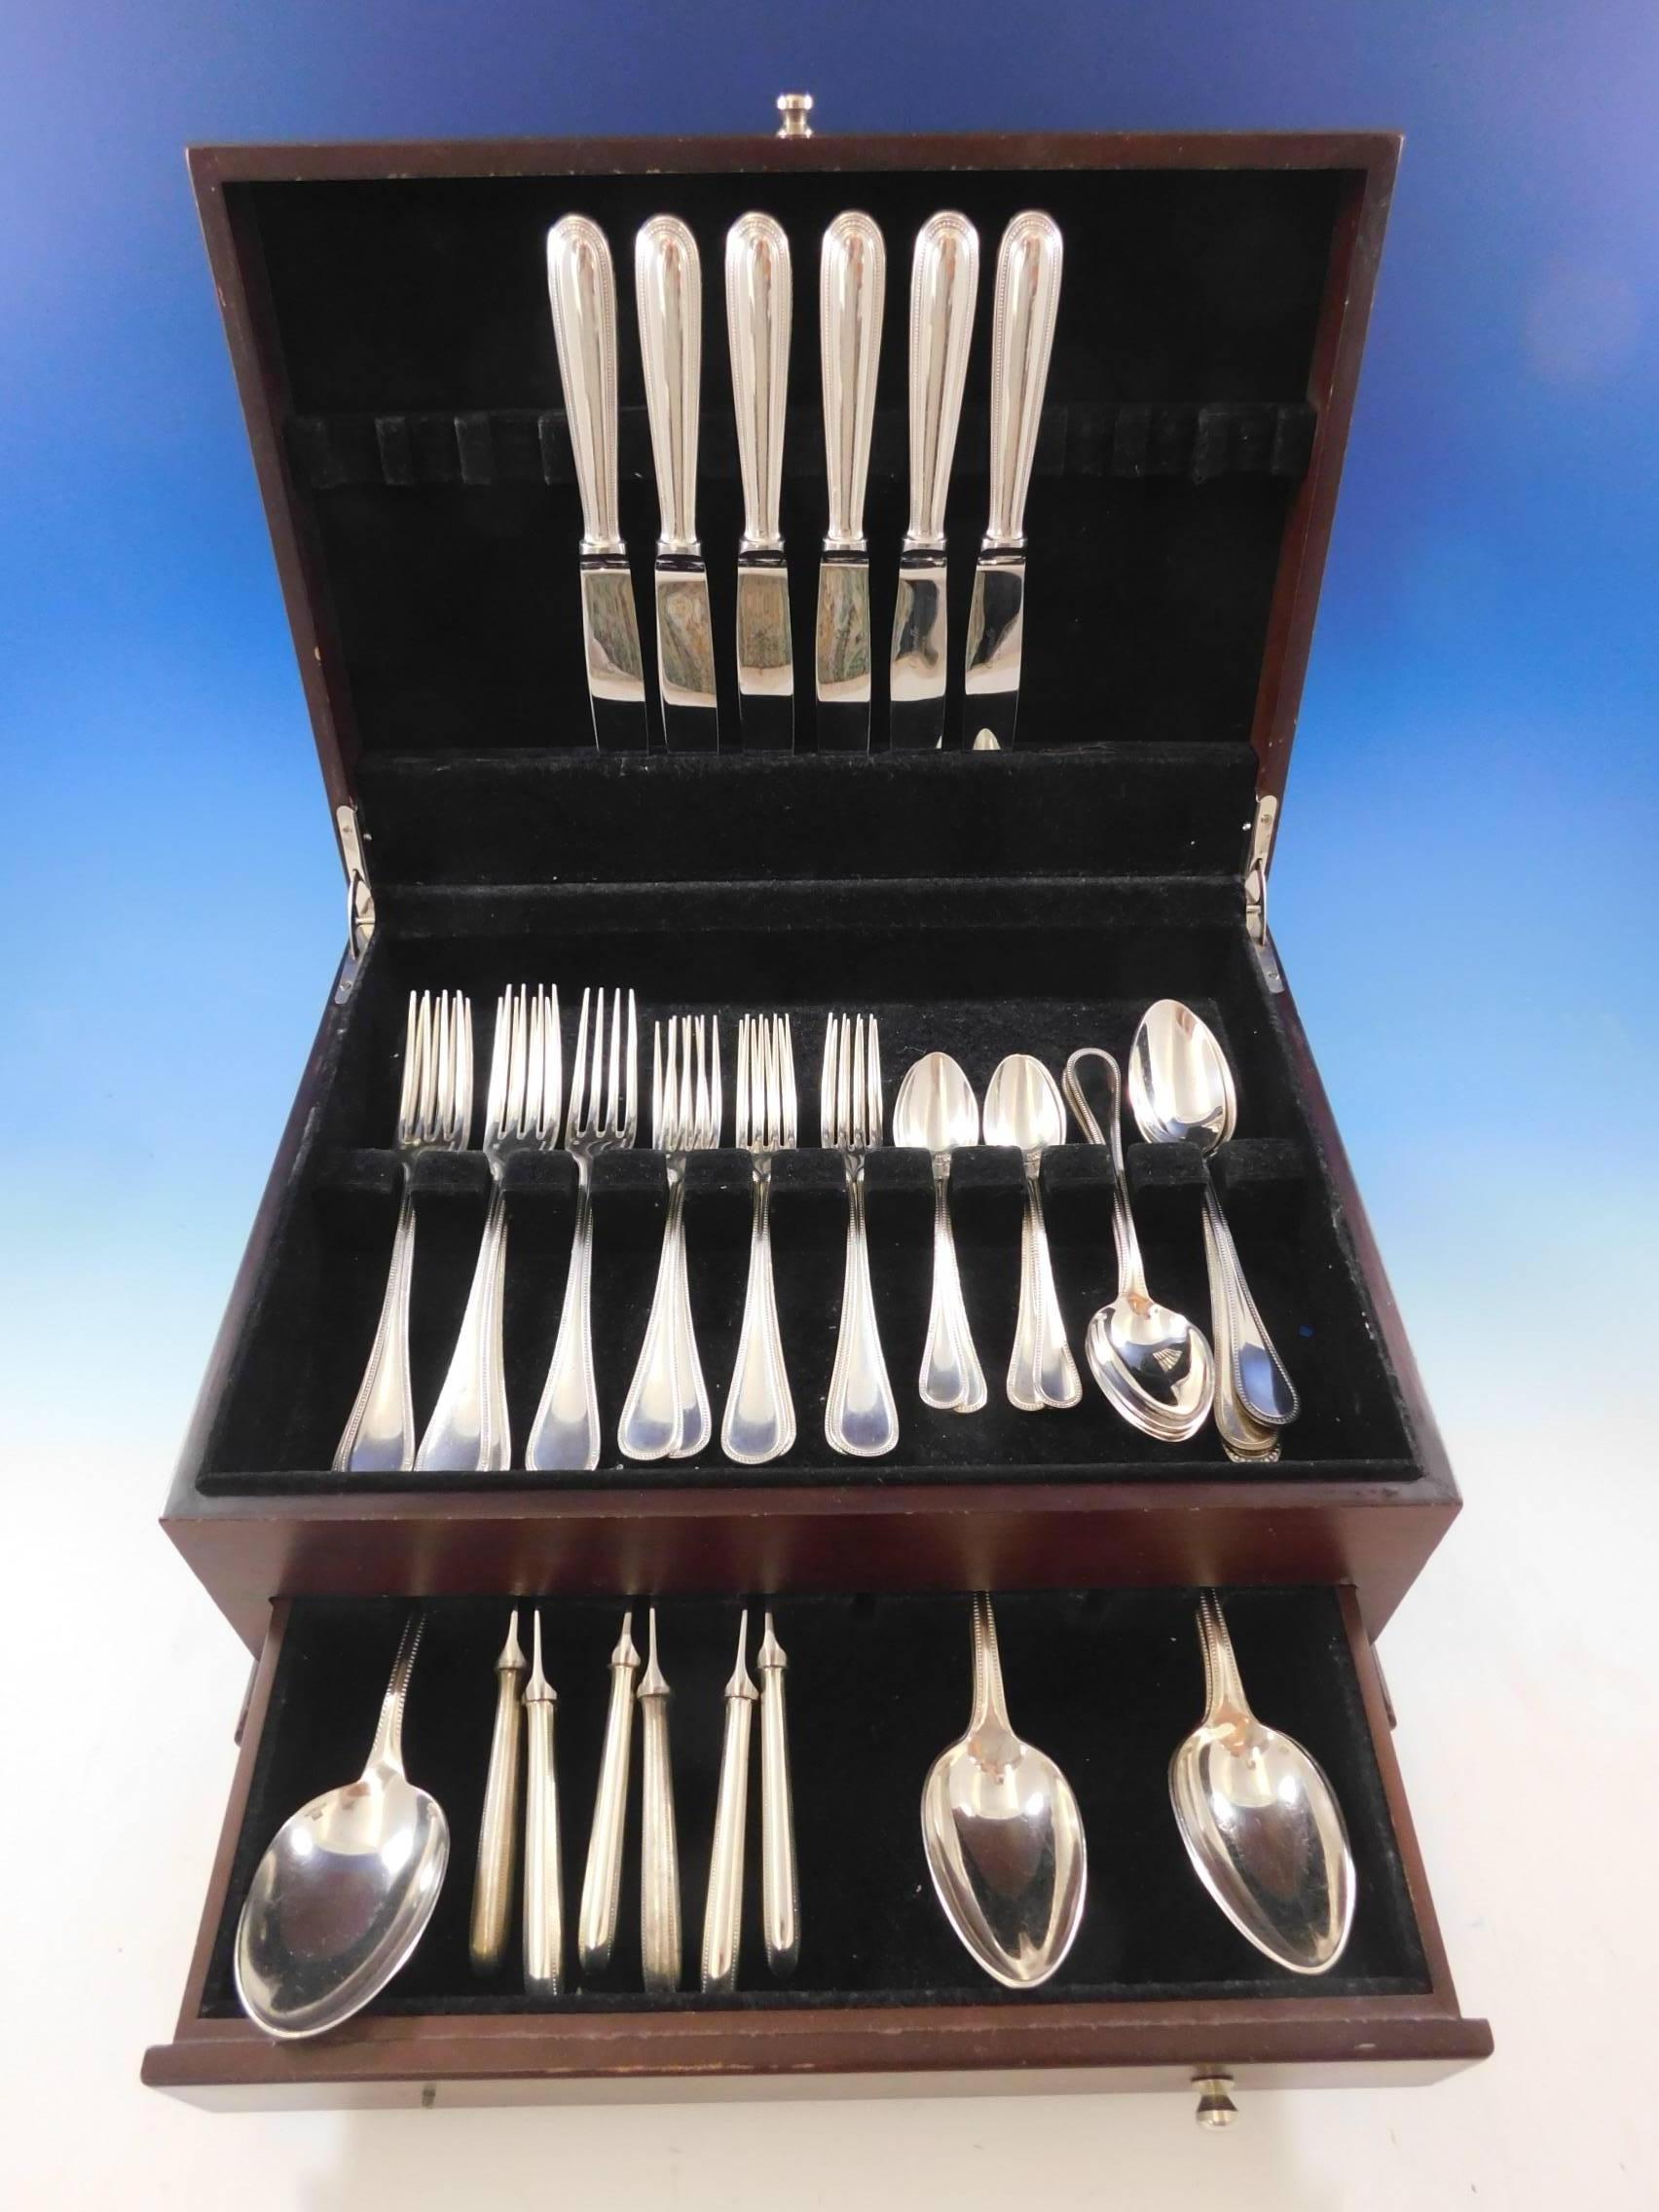 Dinner size Perles by Christofle France silver plate flatware set, 43 pieces. Great starter set! This set includes: Six dinner size knives, 9 3/4